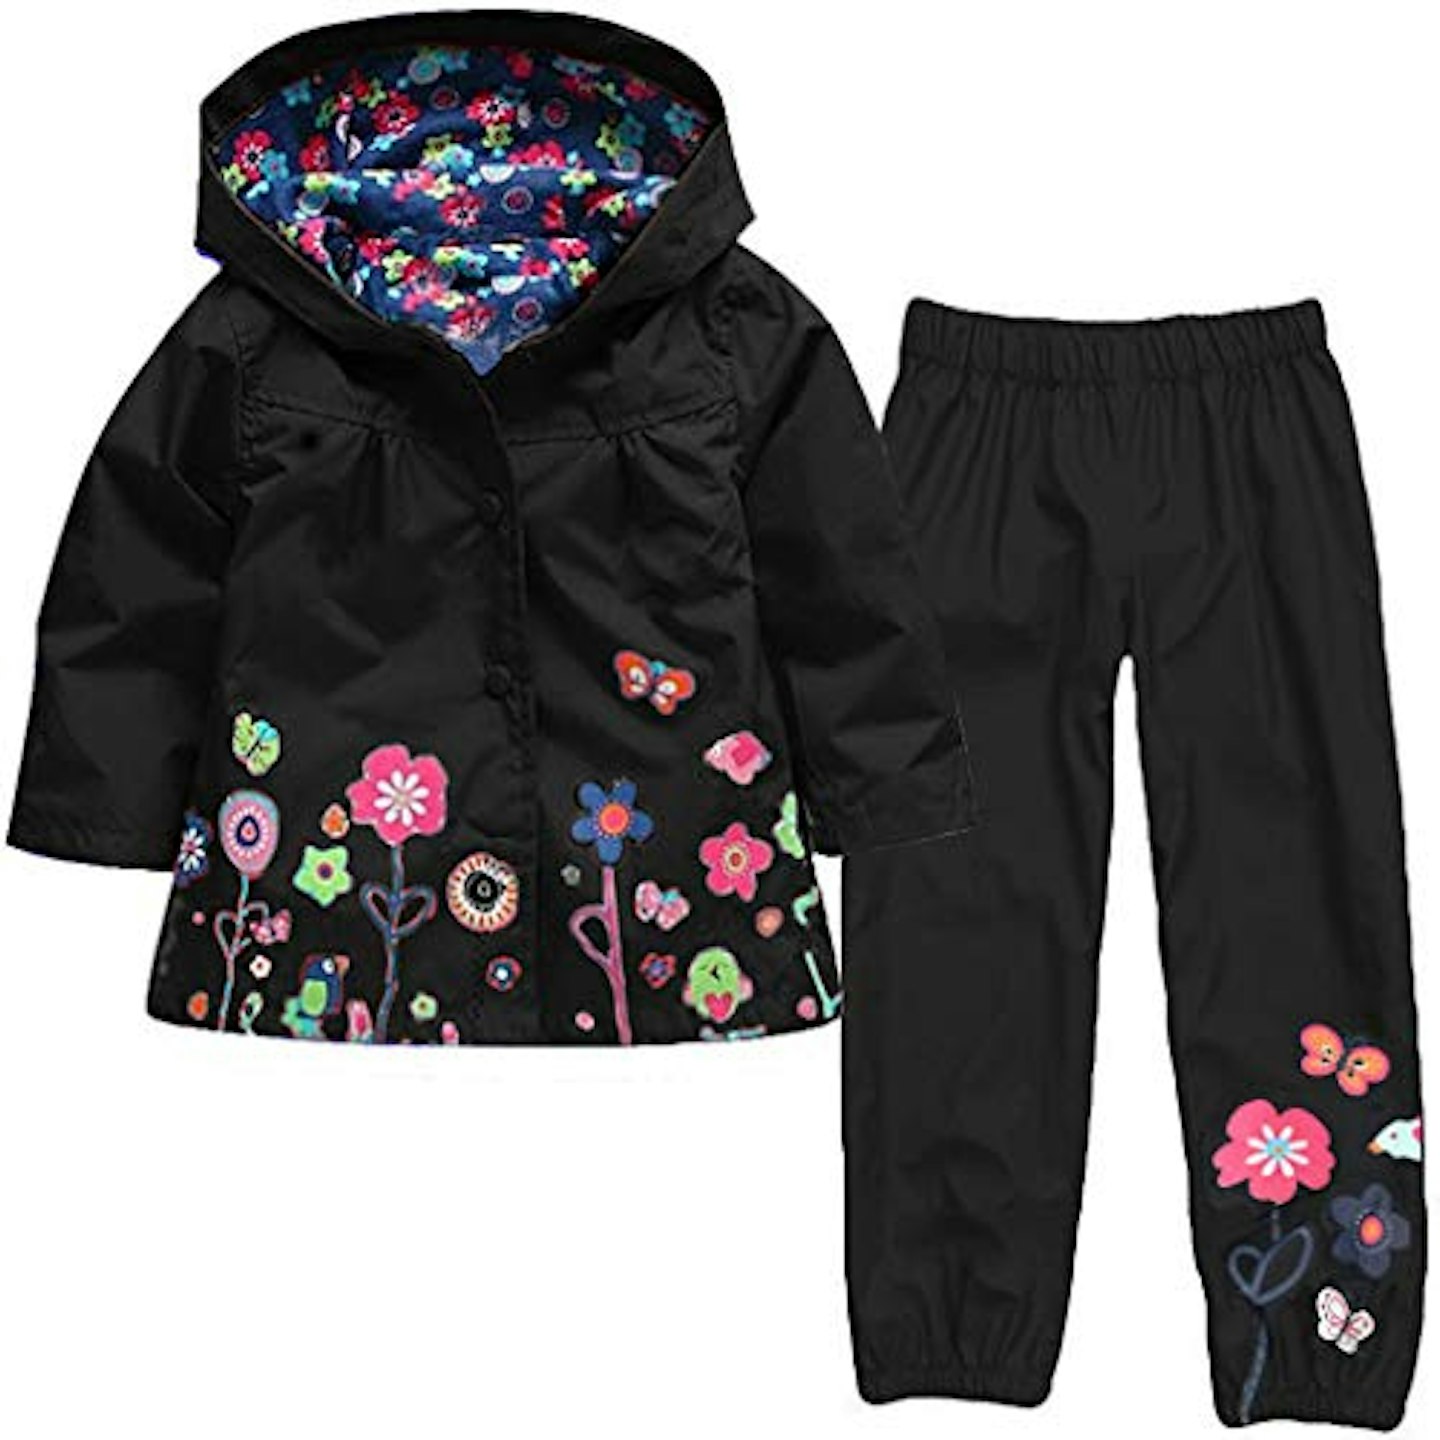 Black and floral kids hooded raincoat with trousers and patterned lining